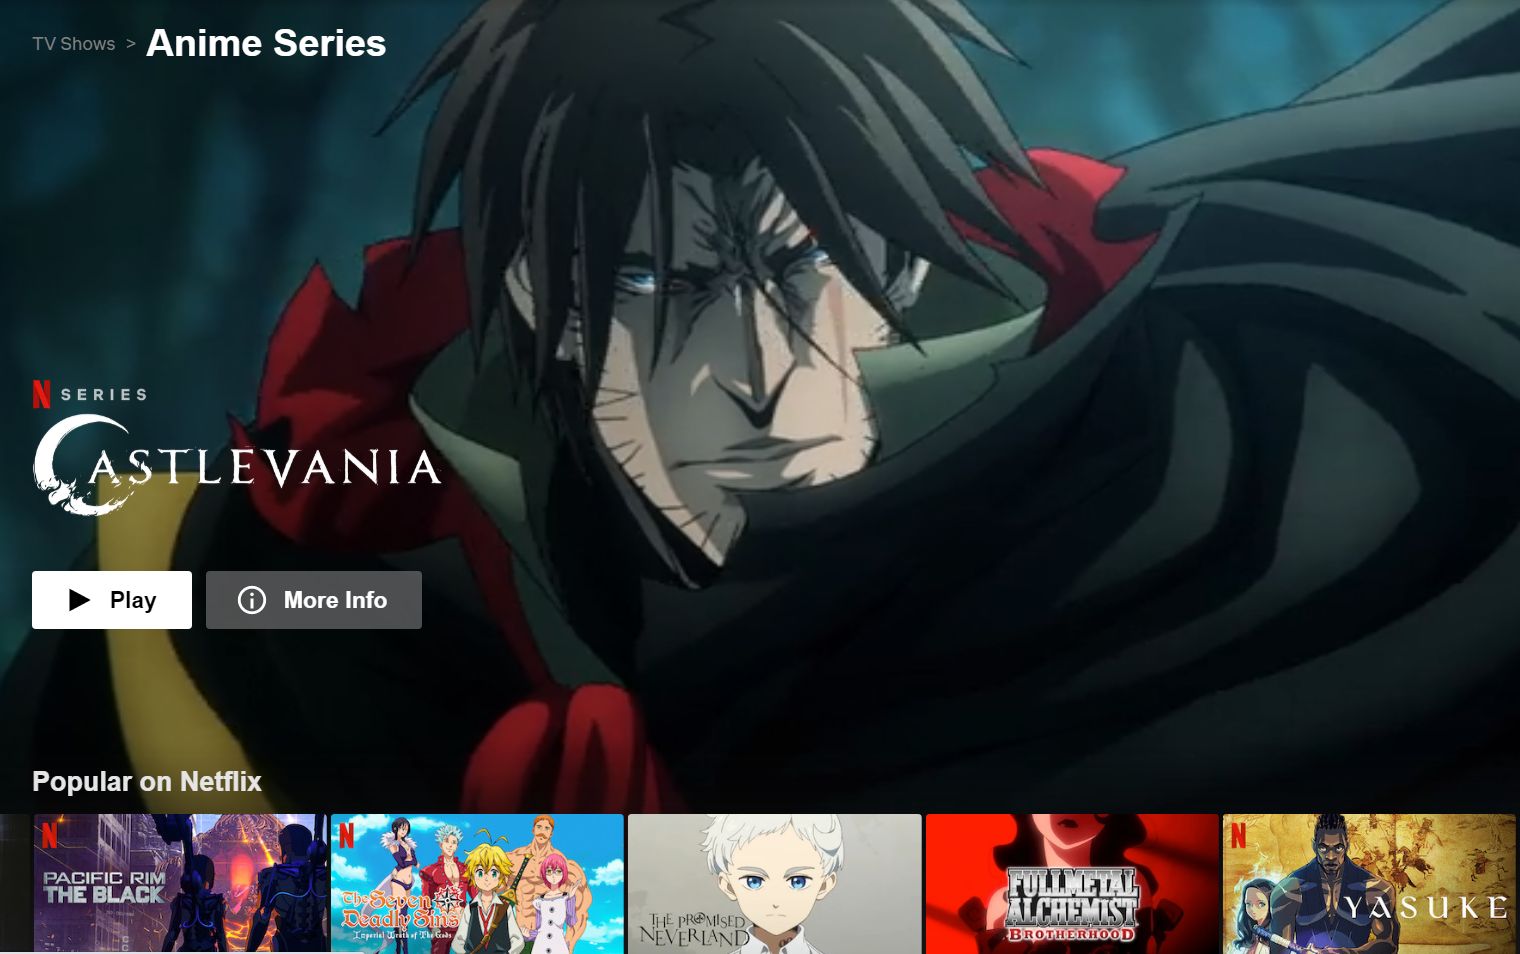 Netflix Anime Series showing Castlevania and other Popular on Netflix titles.